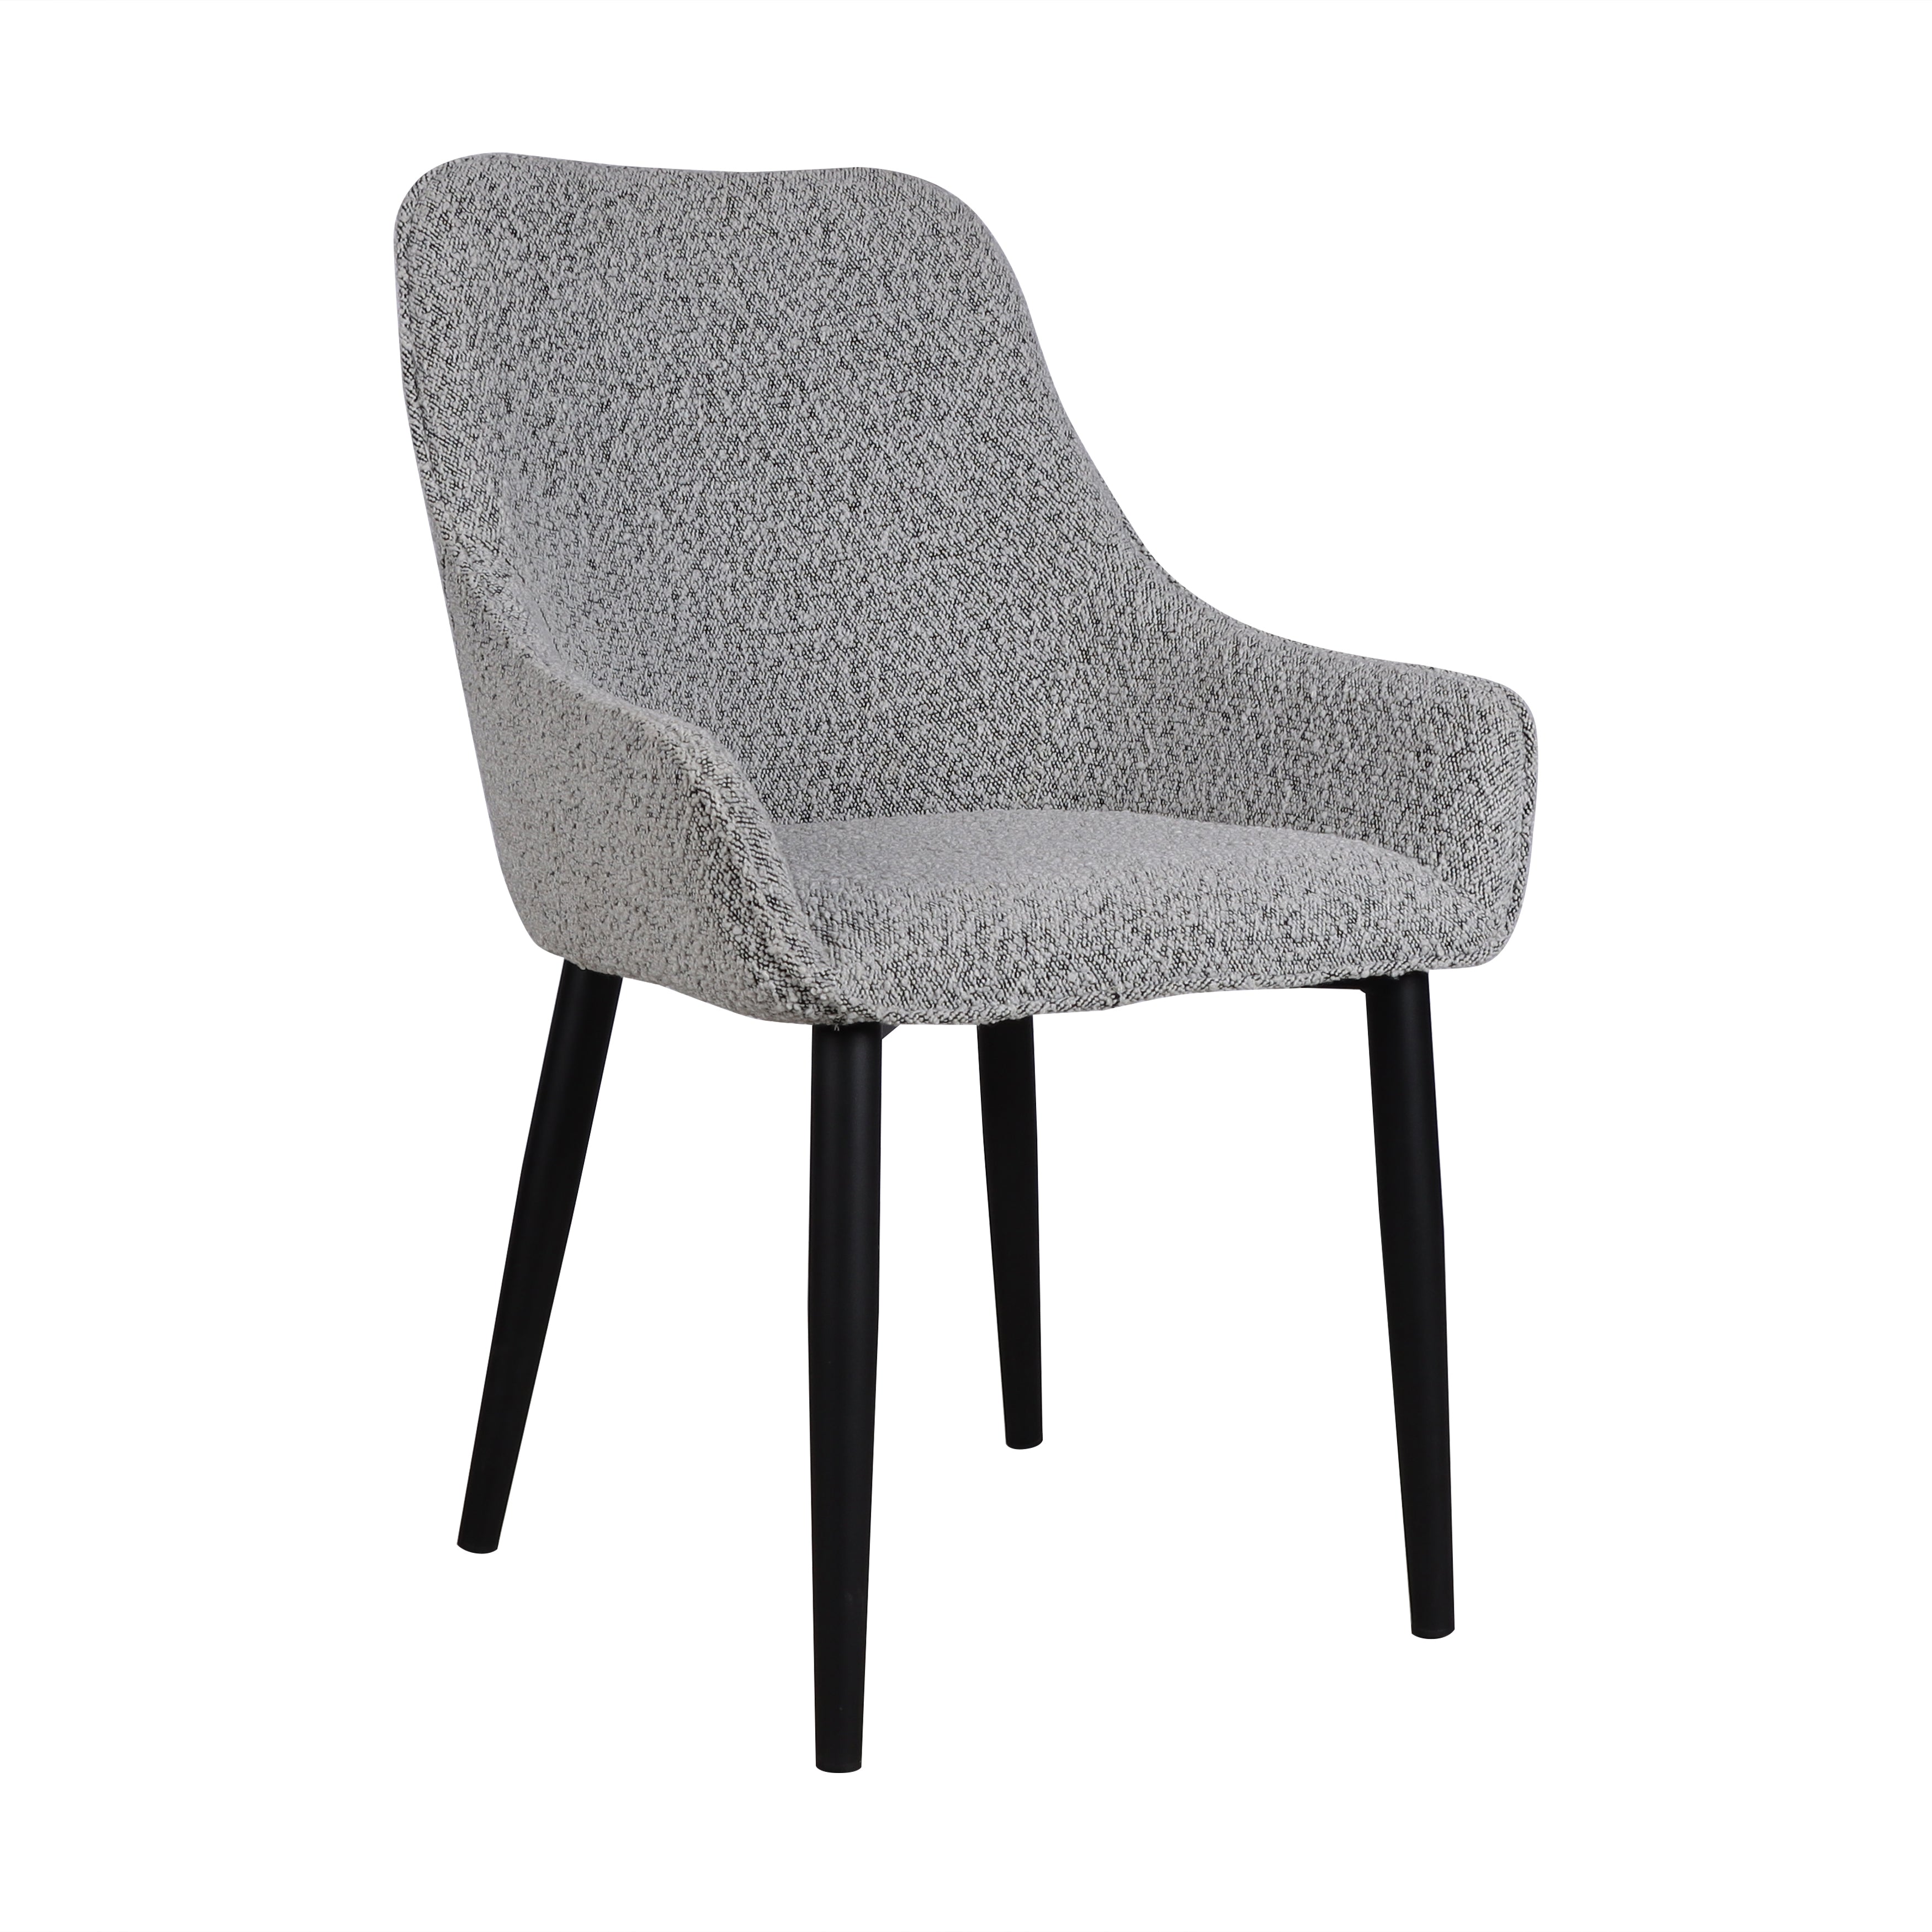 Acosta Dining Chair - Pepper Boucle in Black Legs (Set of 2)